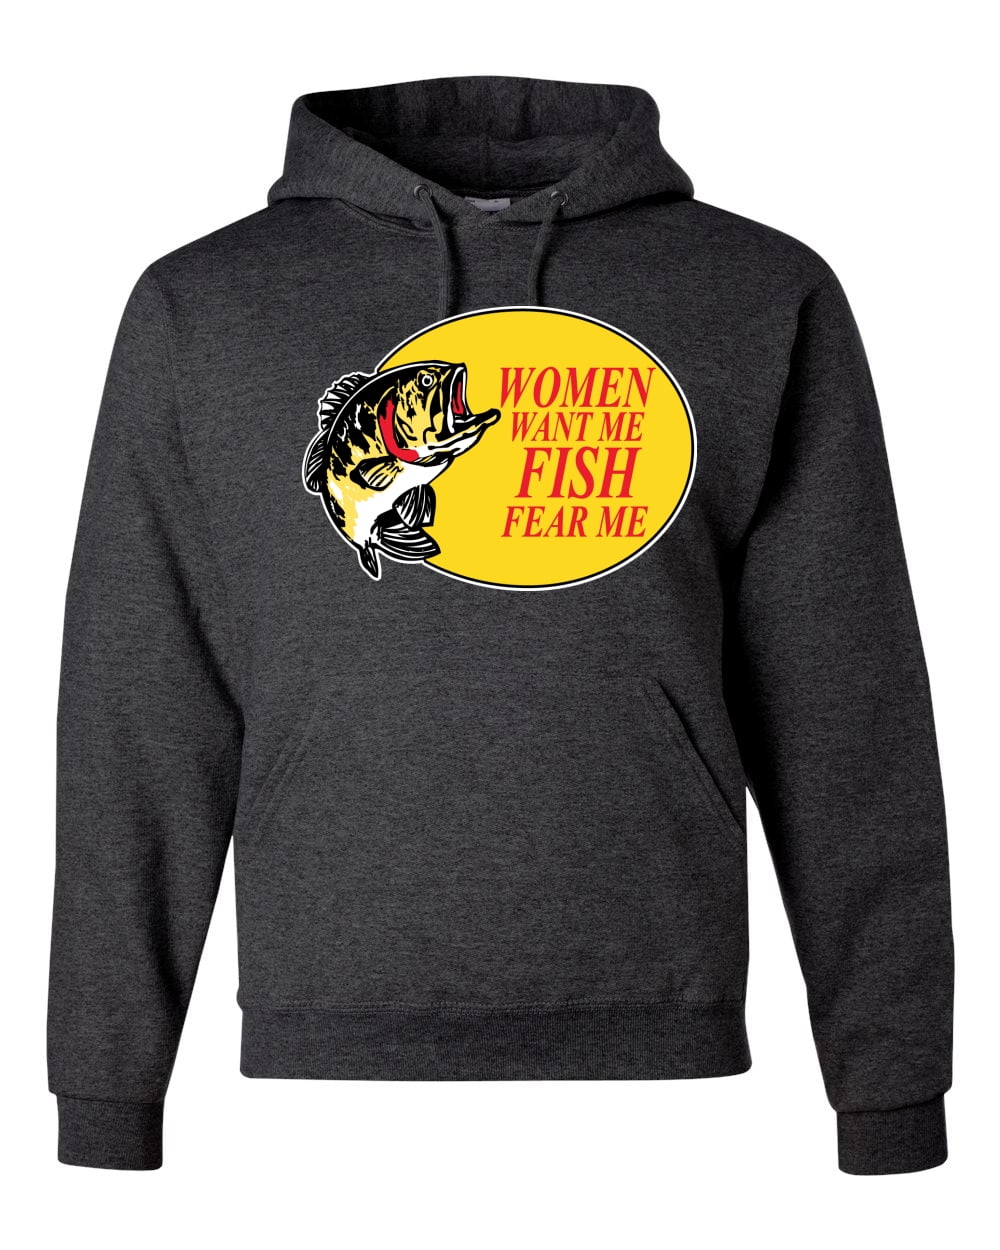 Women Want Me Fish Fear Me Fishing Unisex Graphic Hoodie